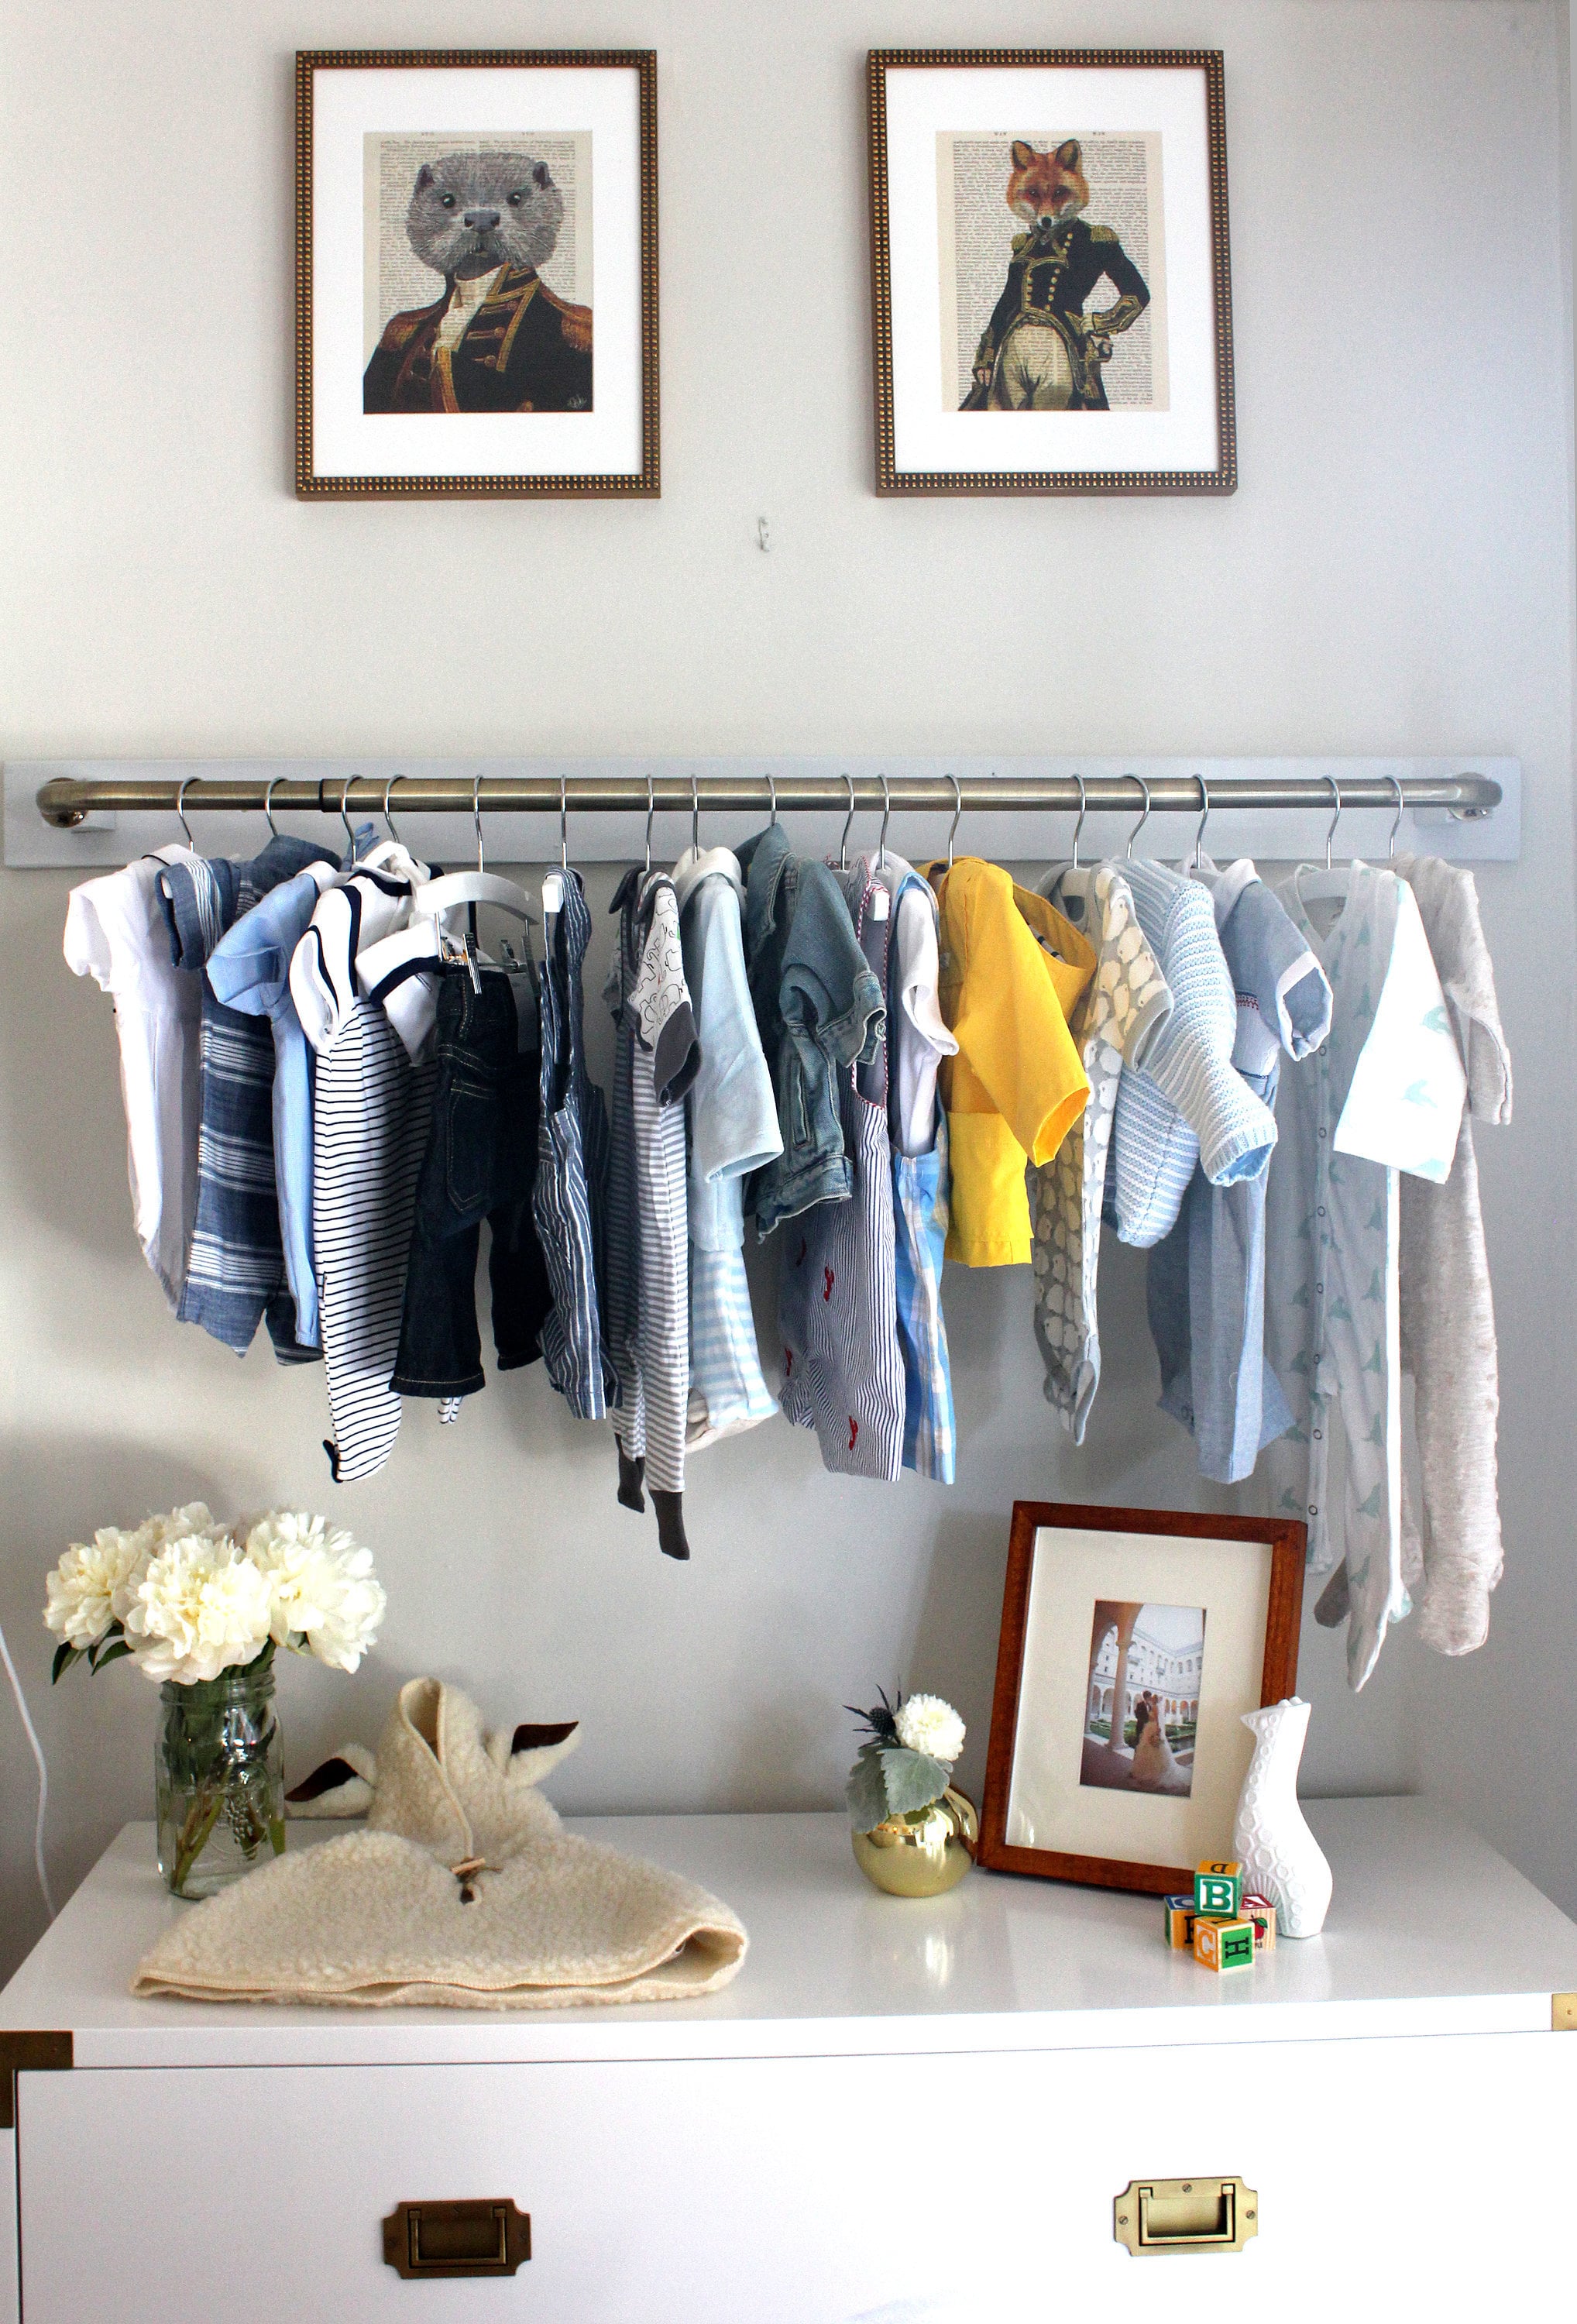 Baby Storage Ideas for Small Spaces - Moove In Self Storage – Blog